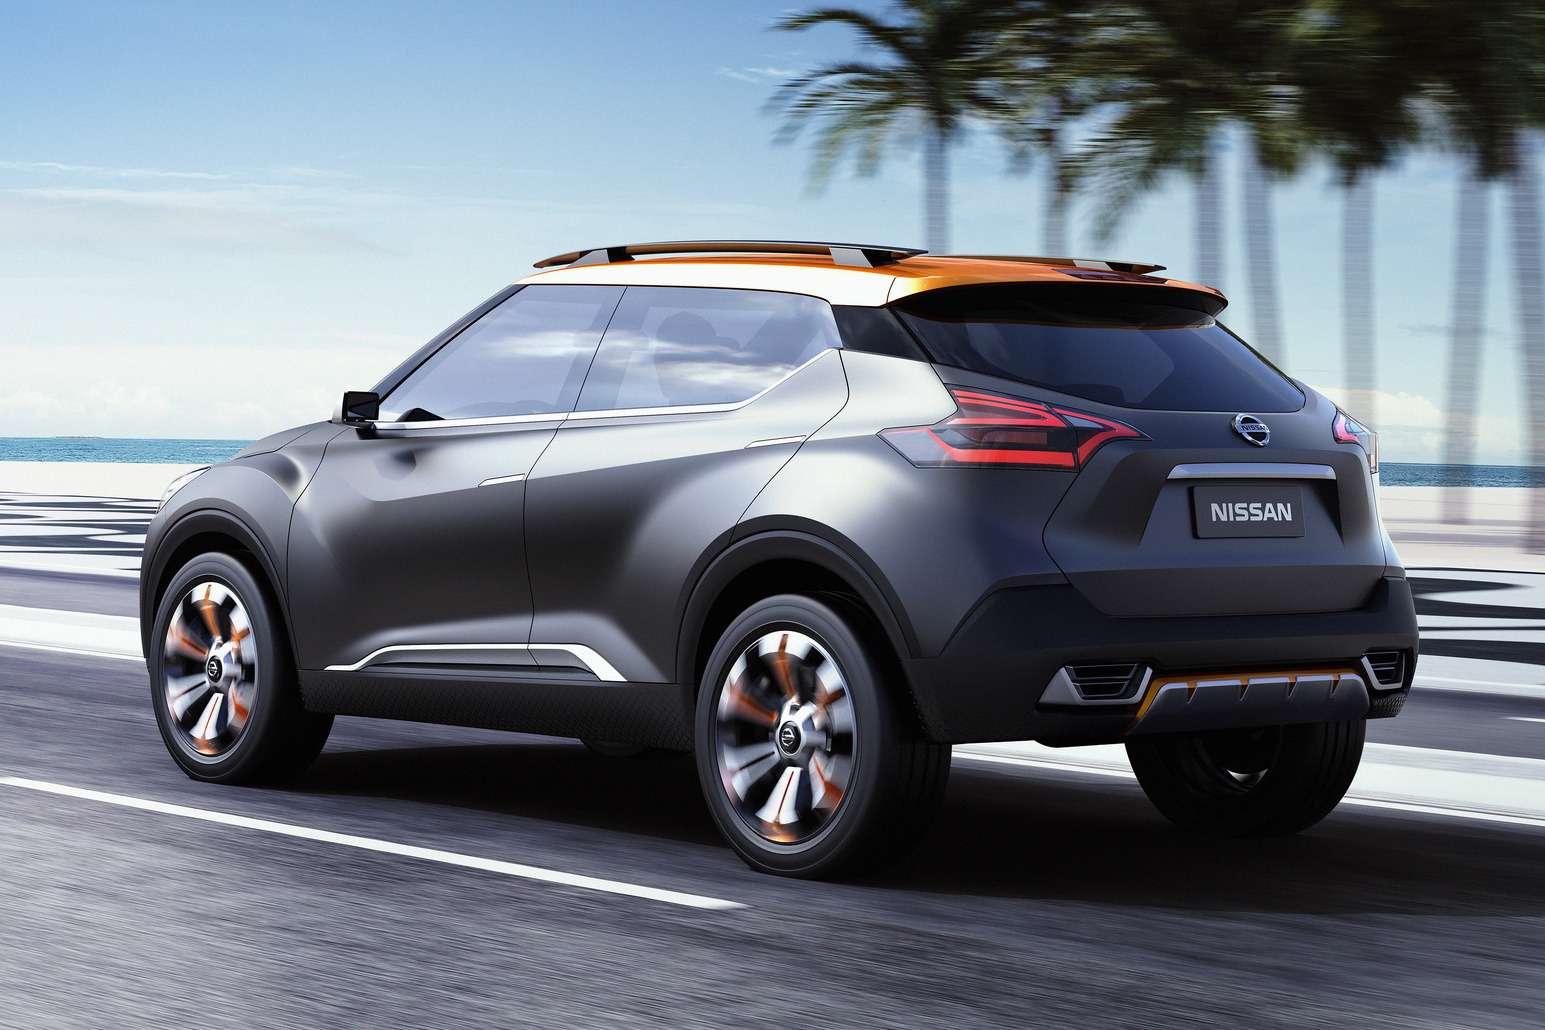 nissan-kicks-suv-to-debut-in-2016-as-the-official-car-of-the-olympics-in-rio-de-janeiro_3